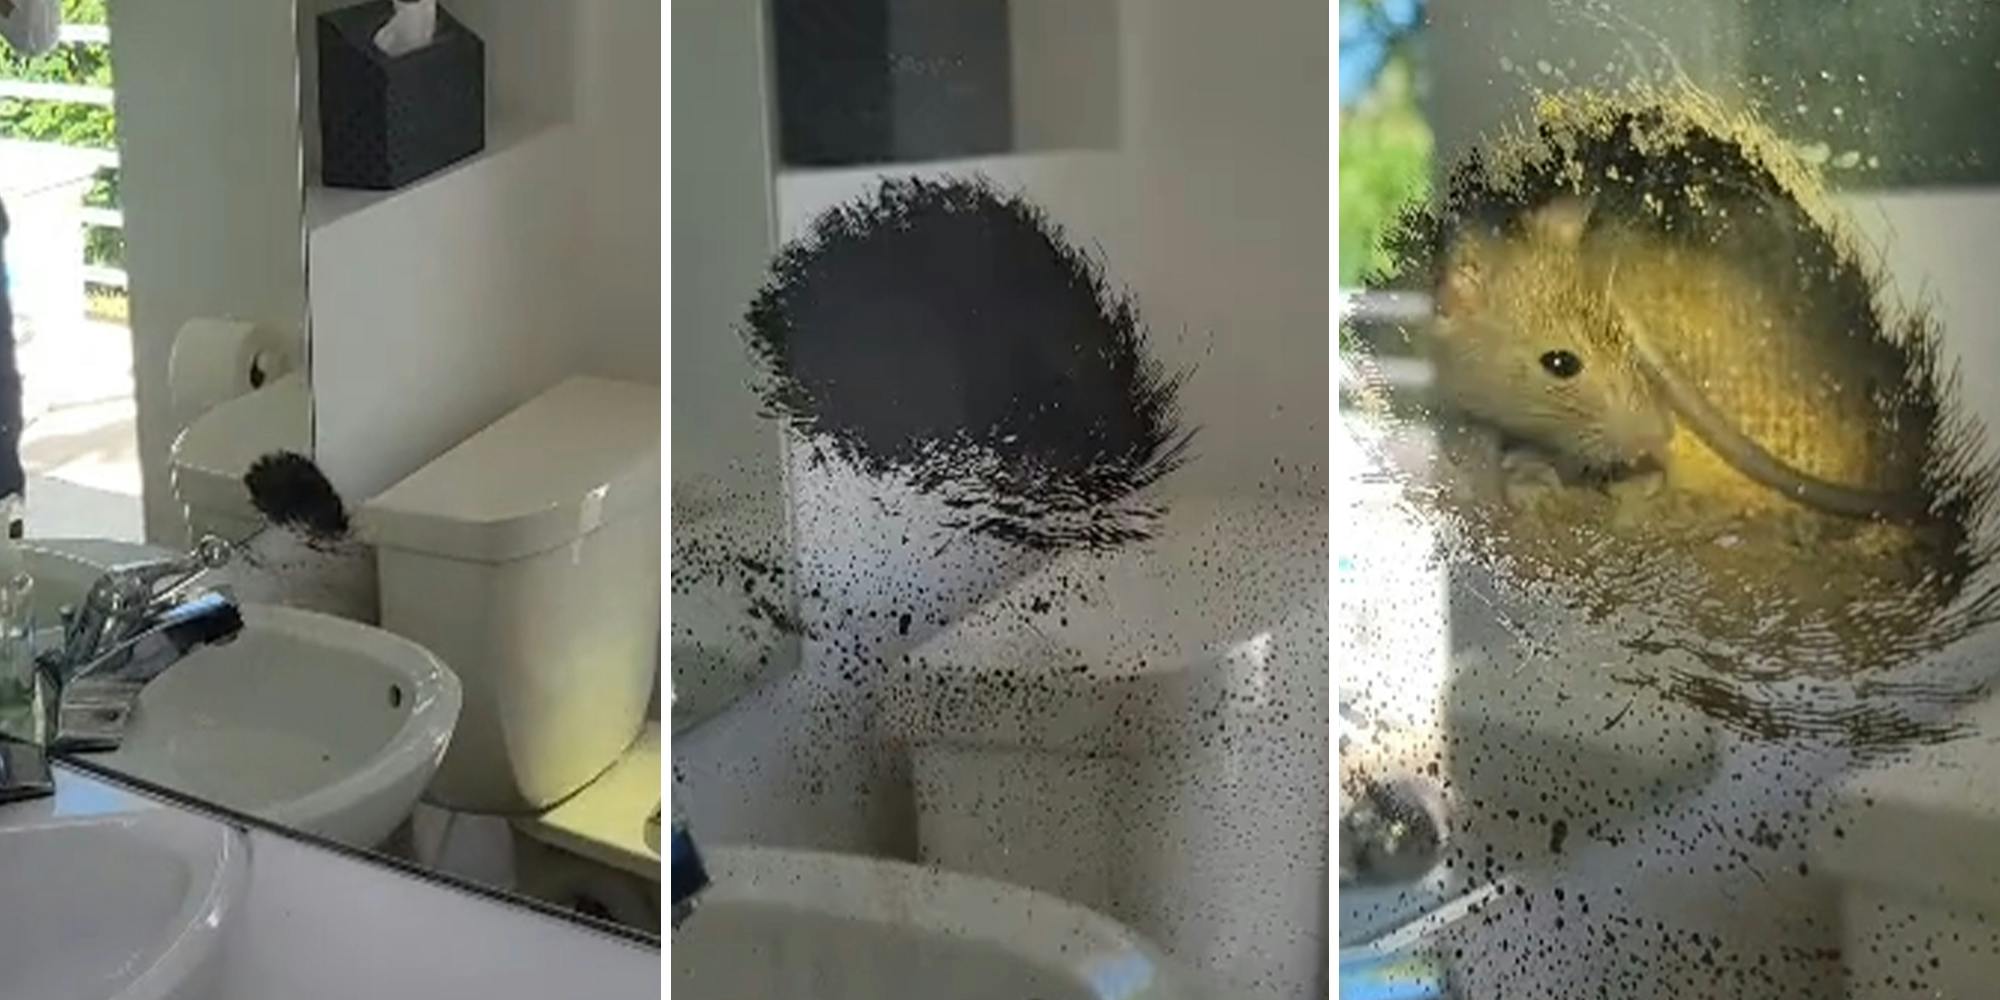 Woman finds rat in open pipe behind mirror